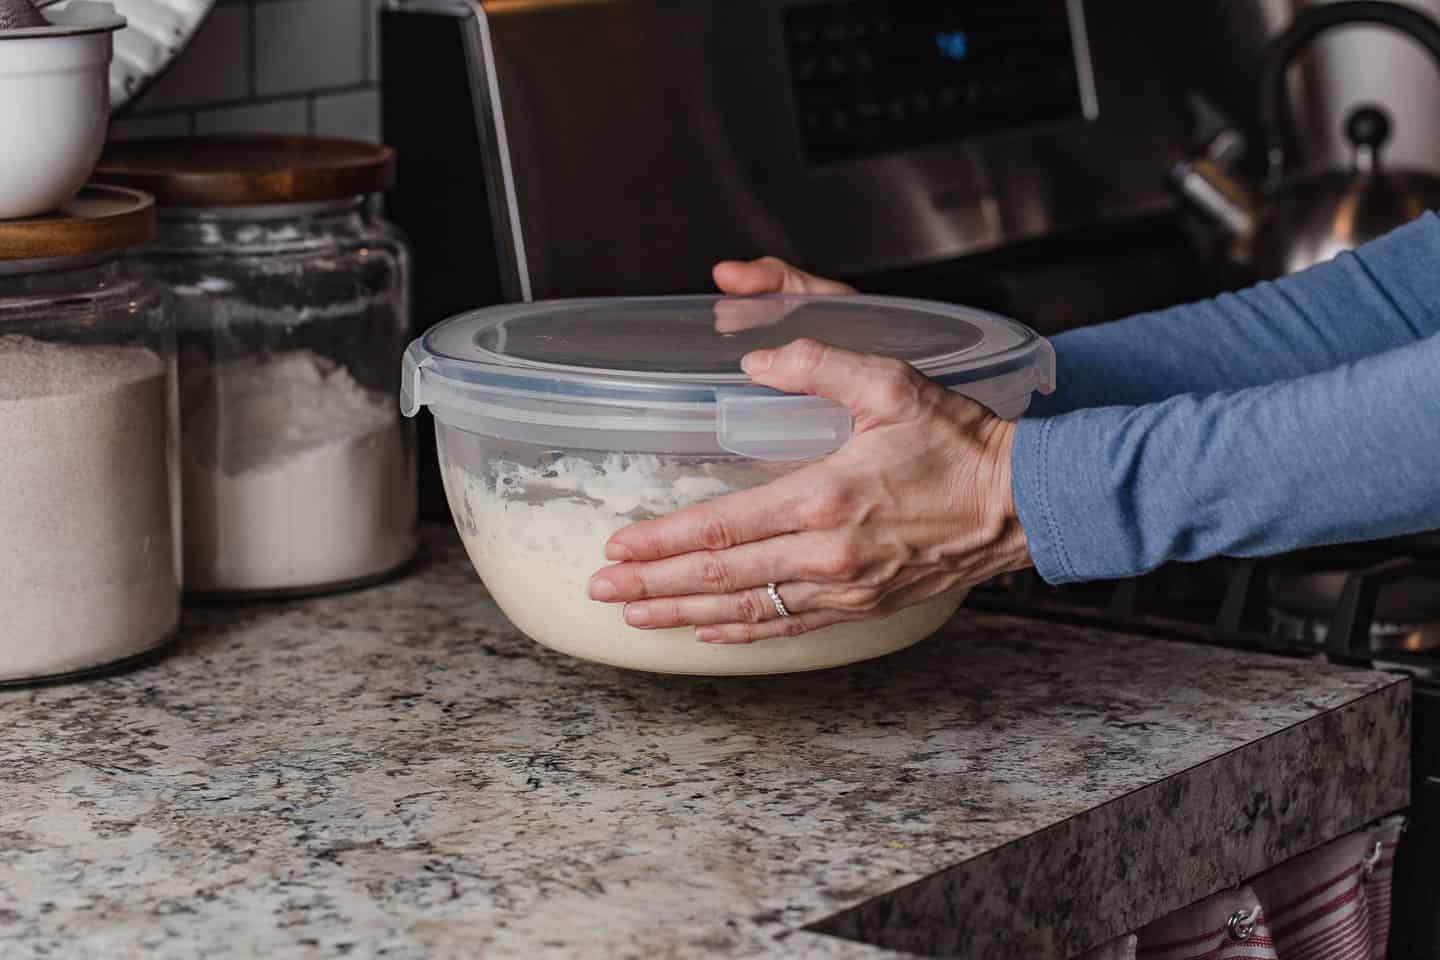 A woman setting a bowl on the counter.